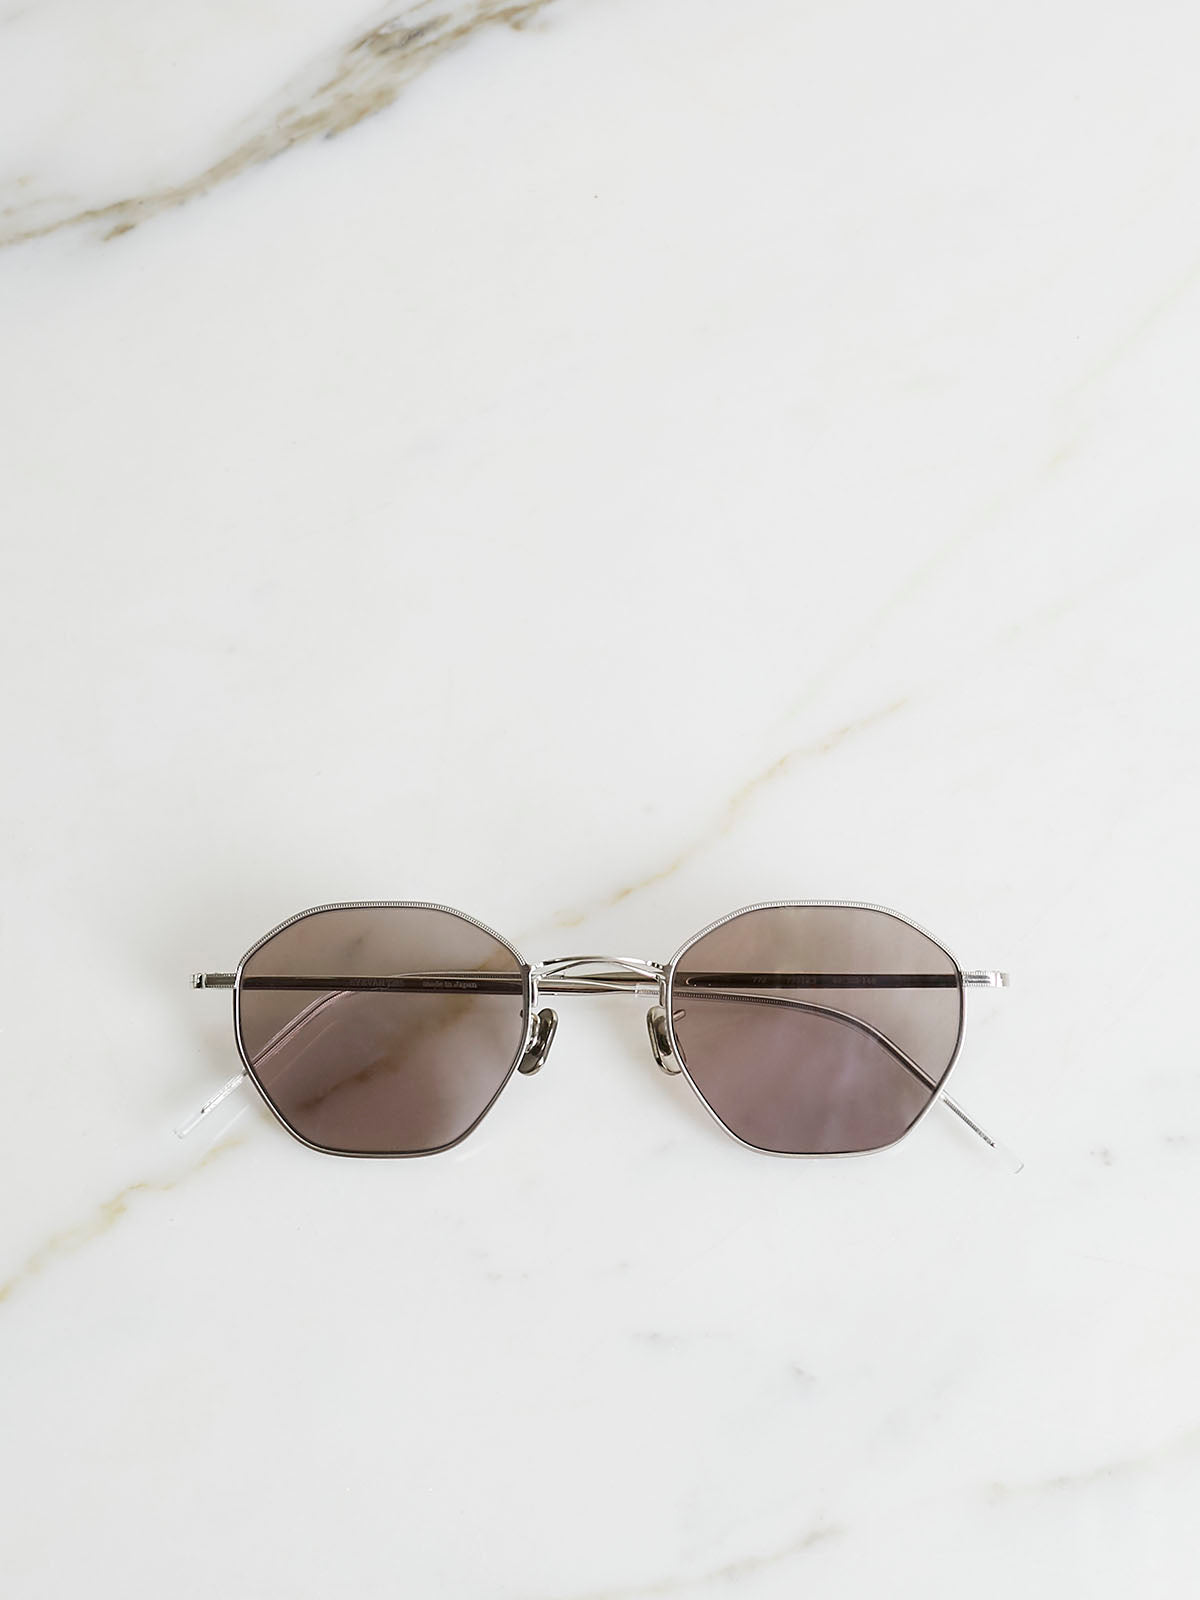 eyevan #142 Eyevol Sunglasses RYS MBK-LY-DK.GRY Rise Square Made in Japan